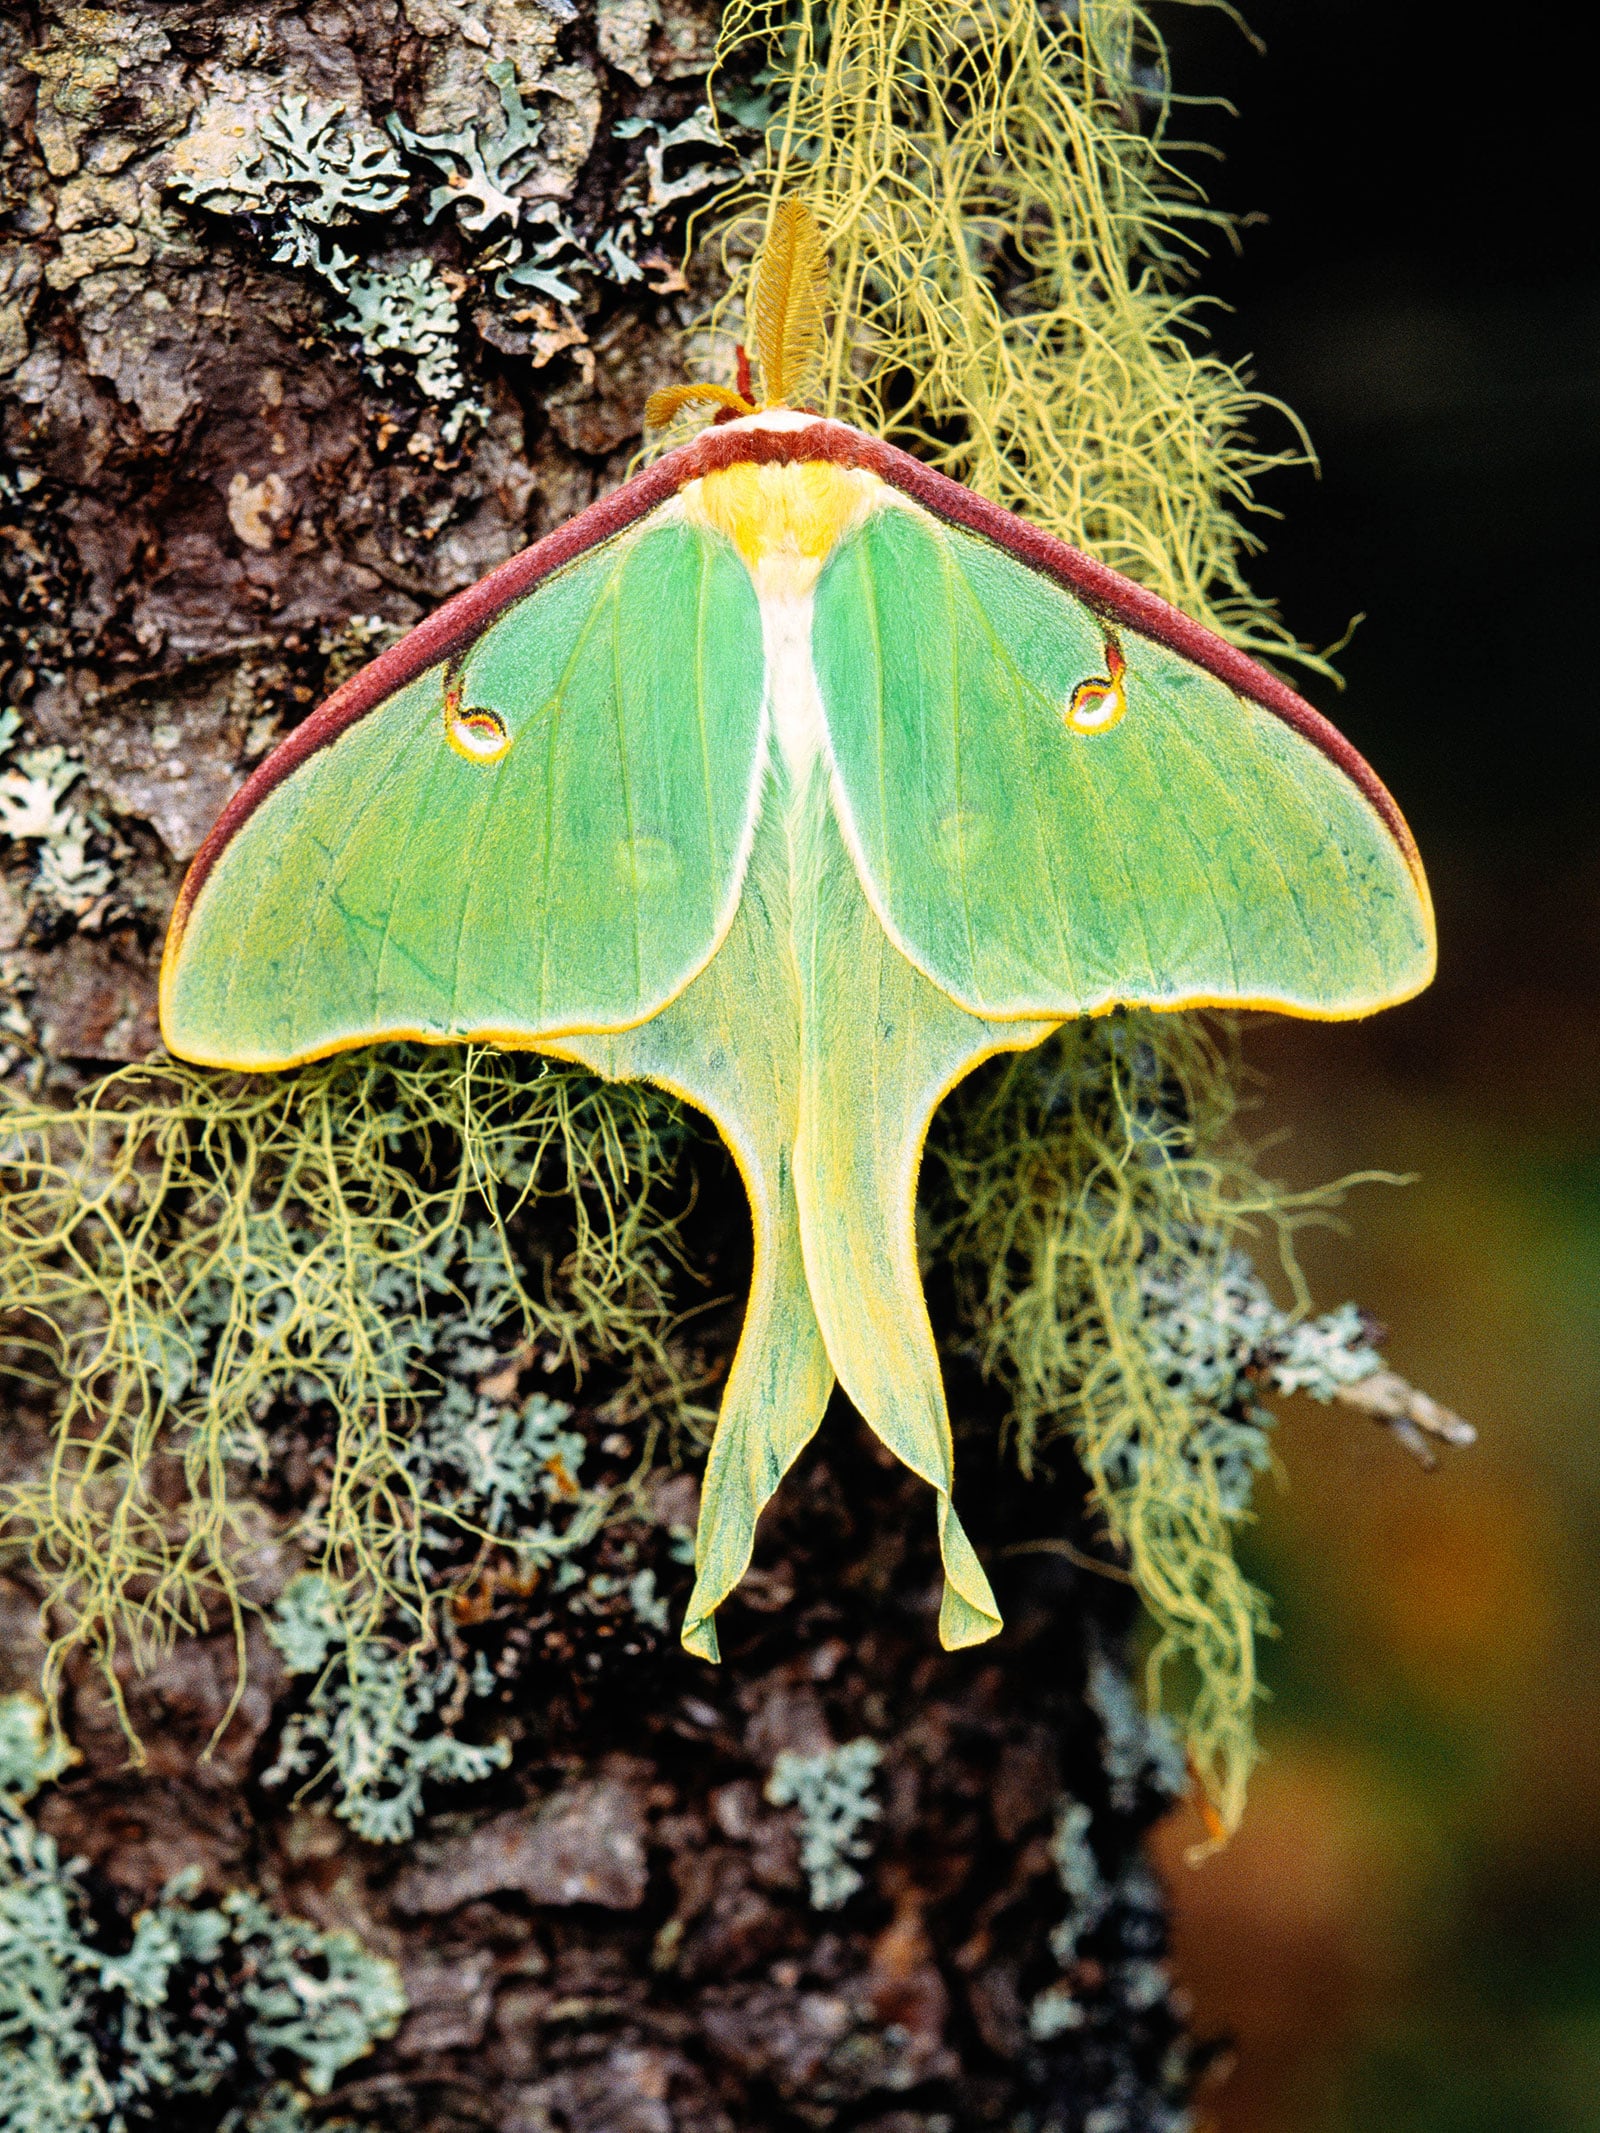 Luna moth resting on a lichen and moss-covered tree trunk